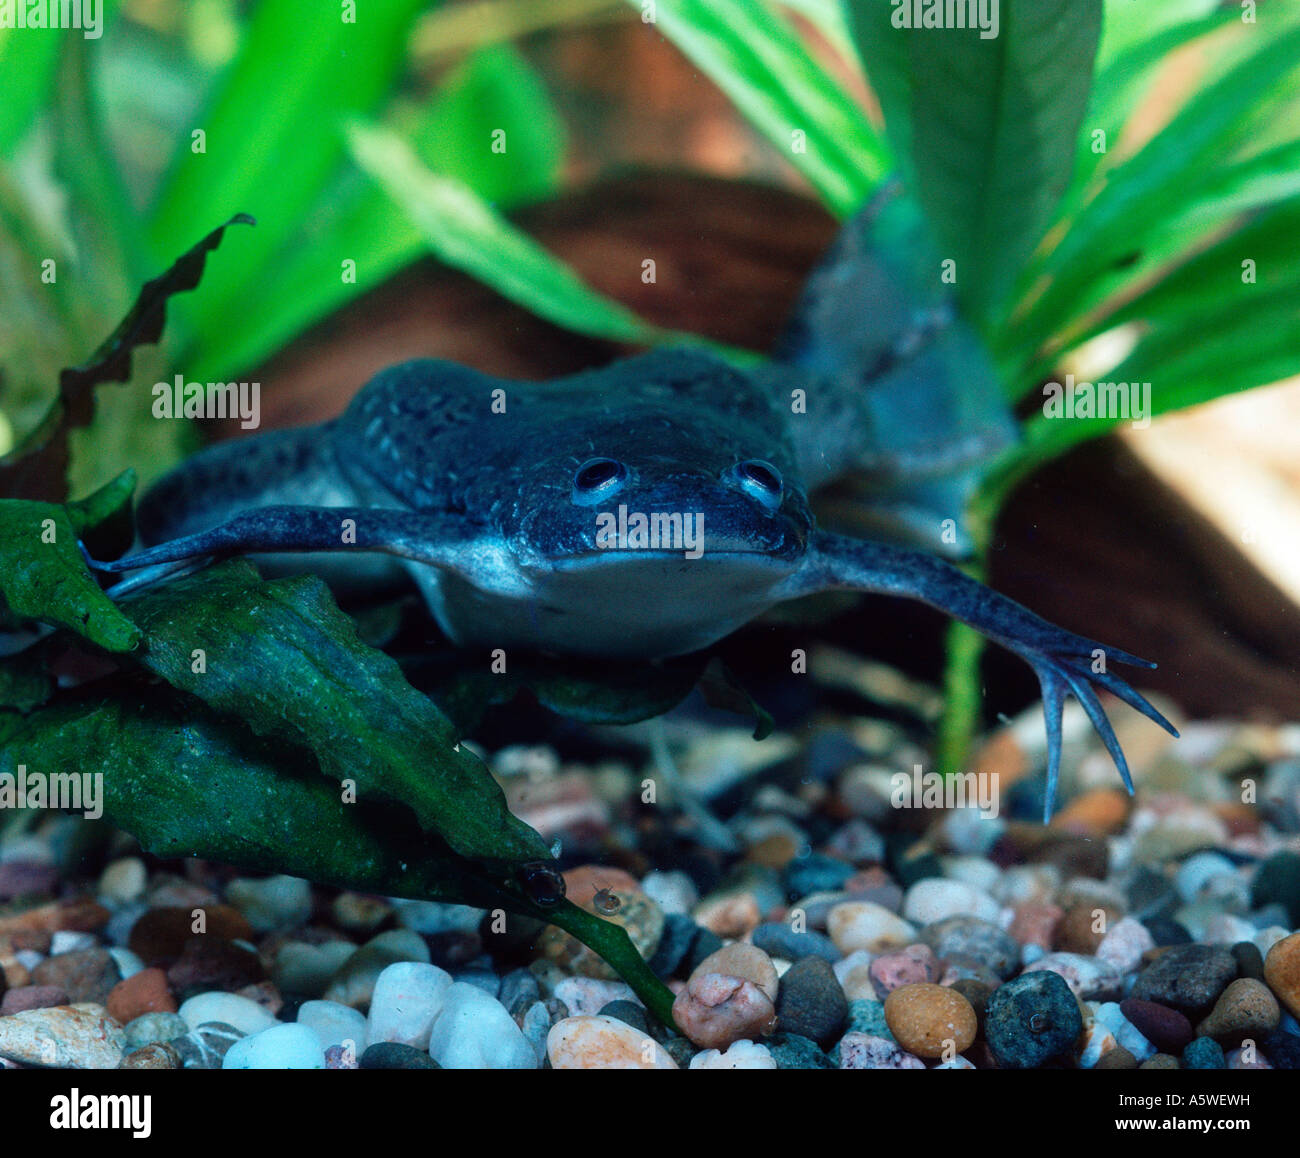 Africa Clawed Frog  Stock Photo